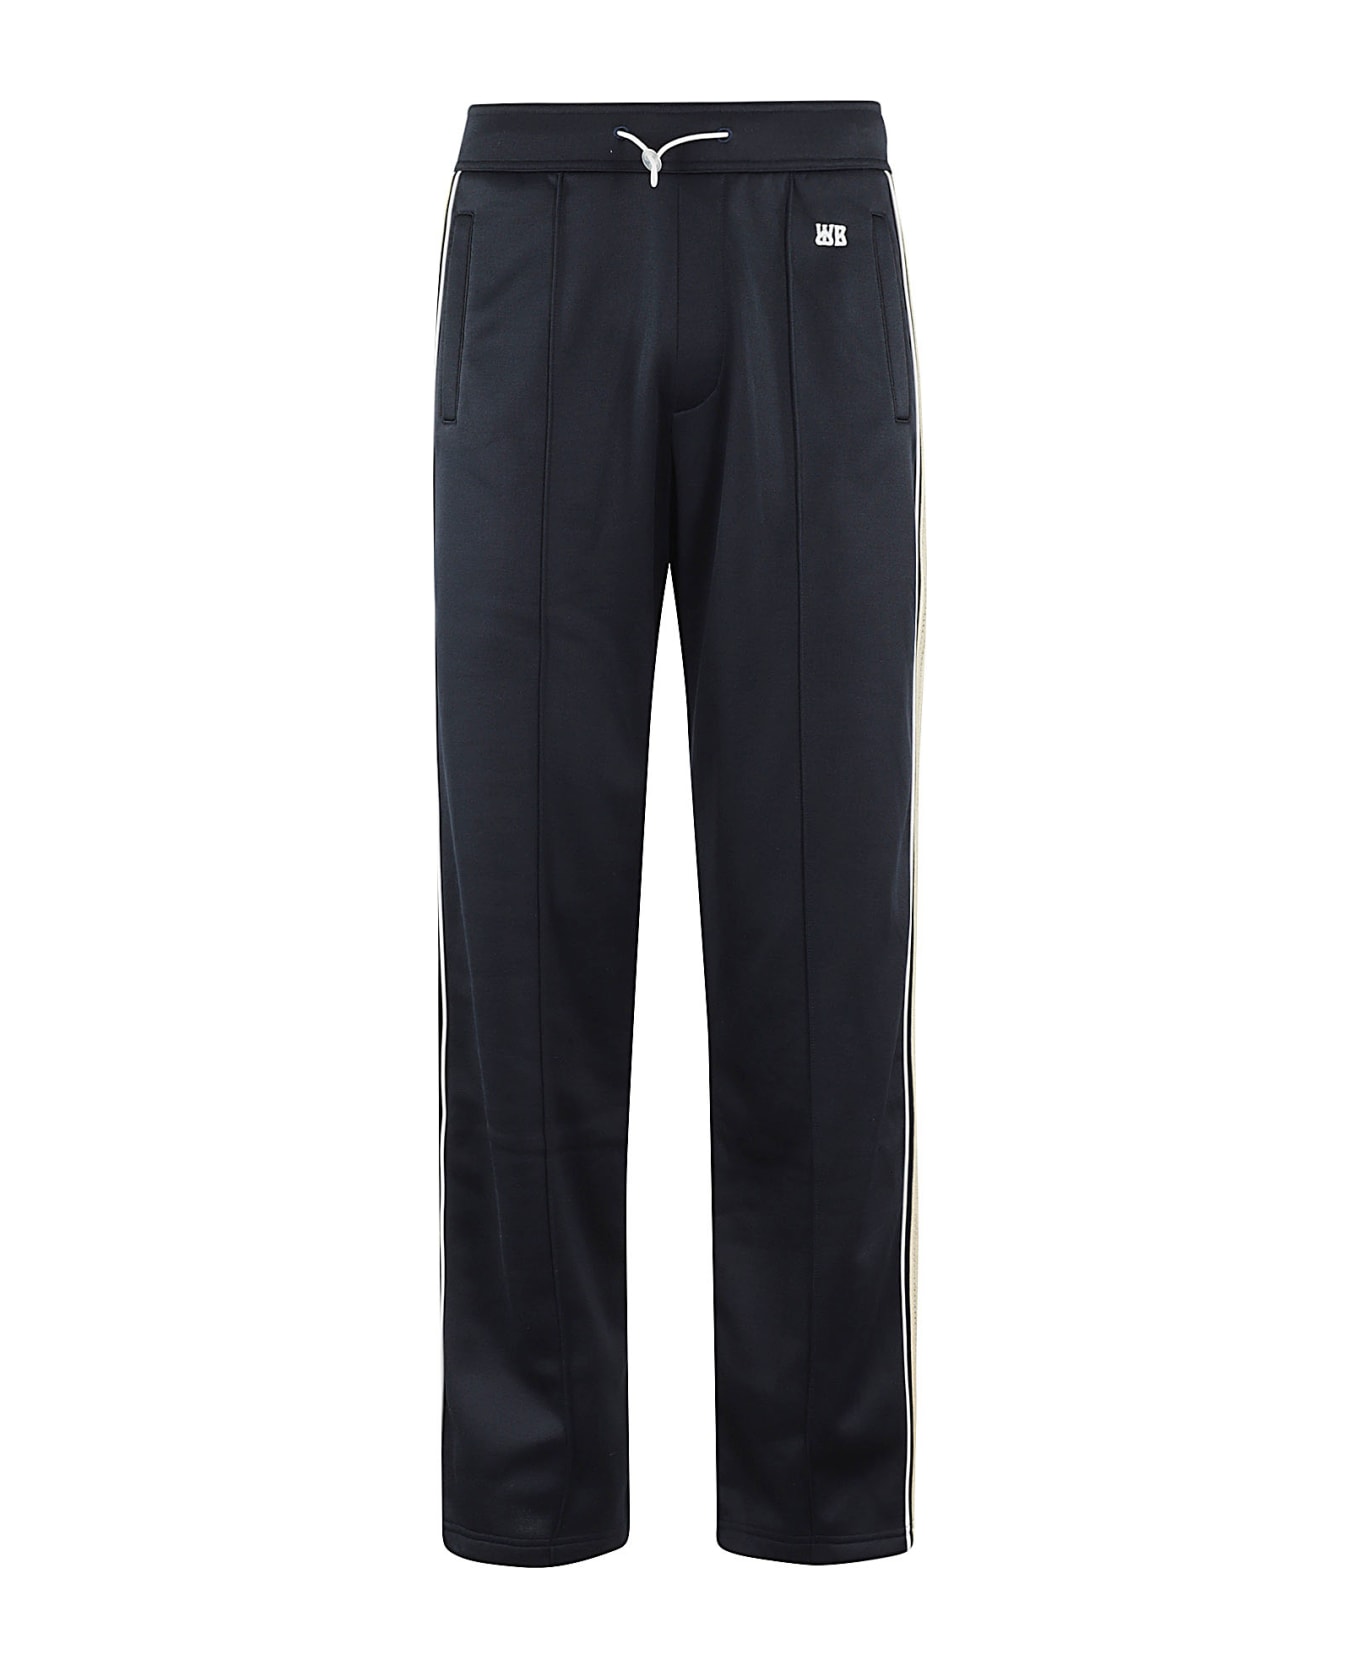 Wales Bonner Mantra Trousers - Navy ボトムス